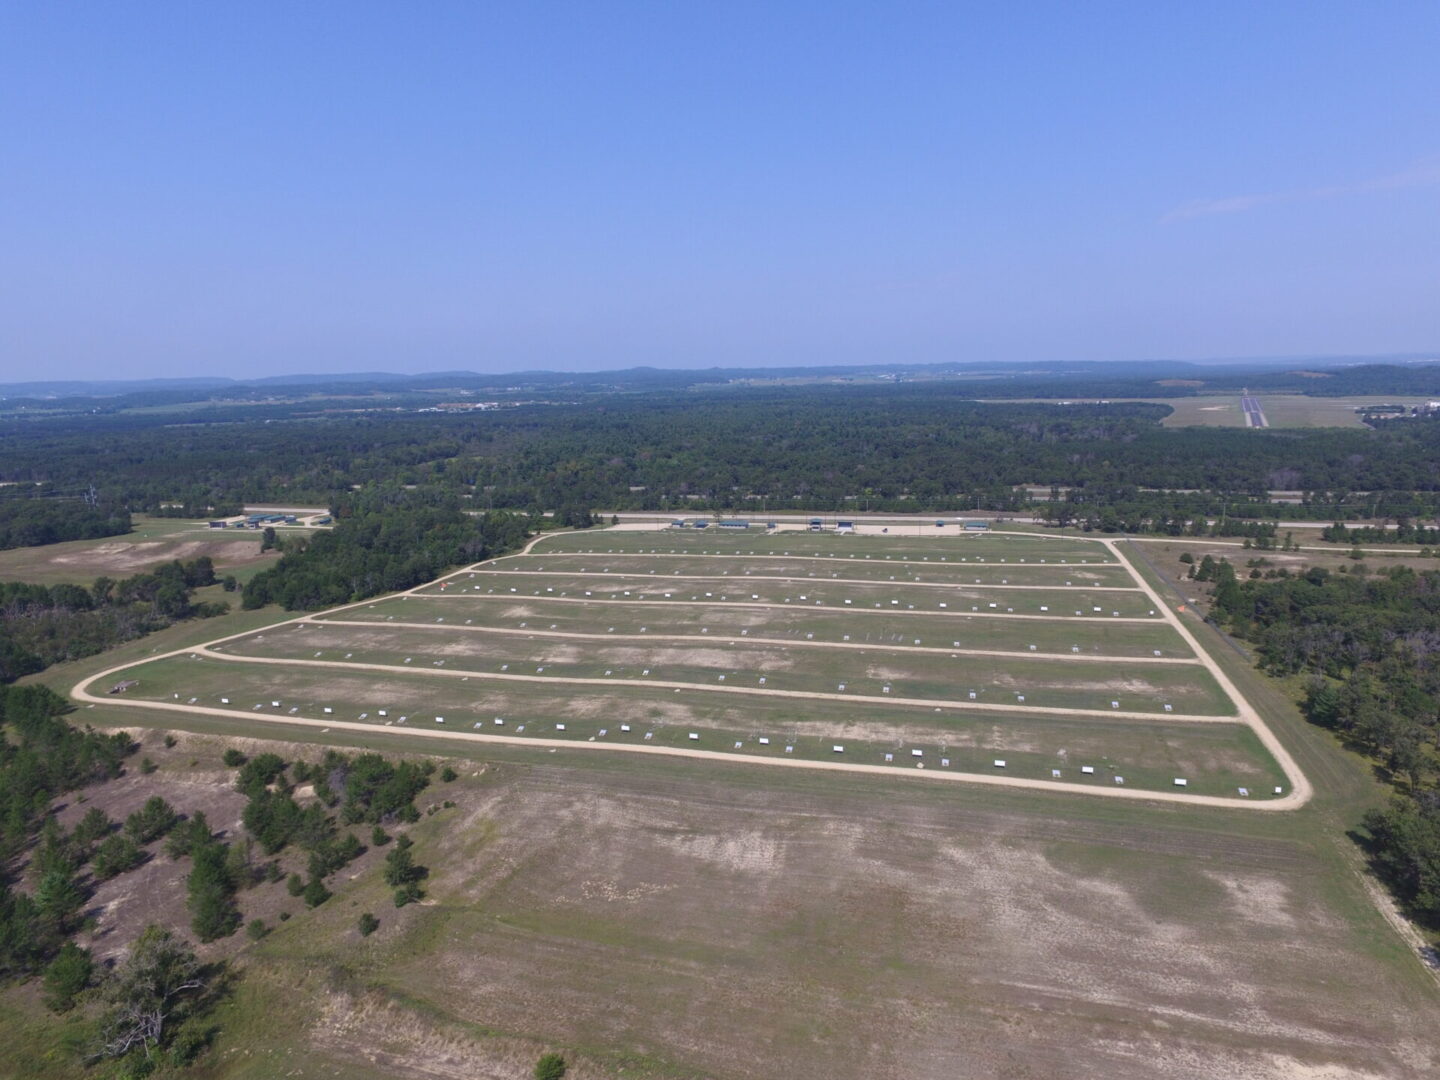 Aerial view of a large outdoor storage area with numerous aligned units under a clear blue sky.